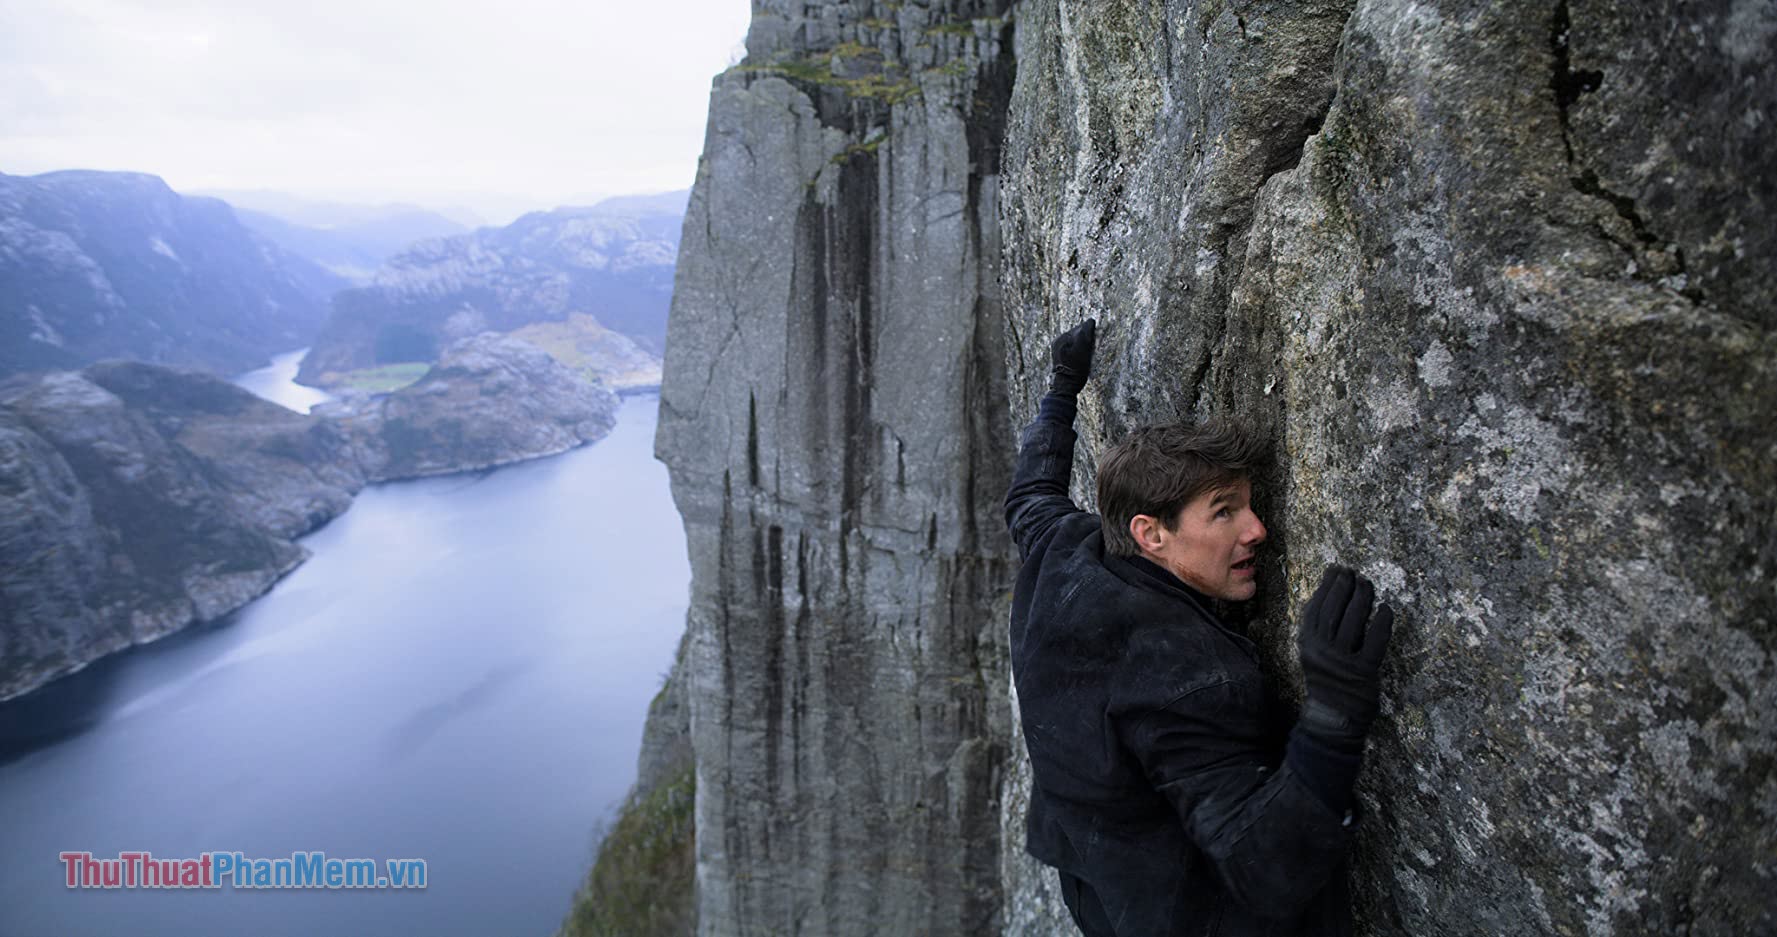 Mission Impossible – Fallout (2018)